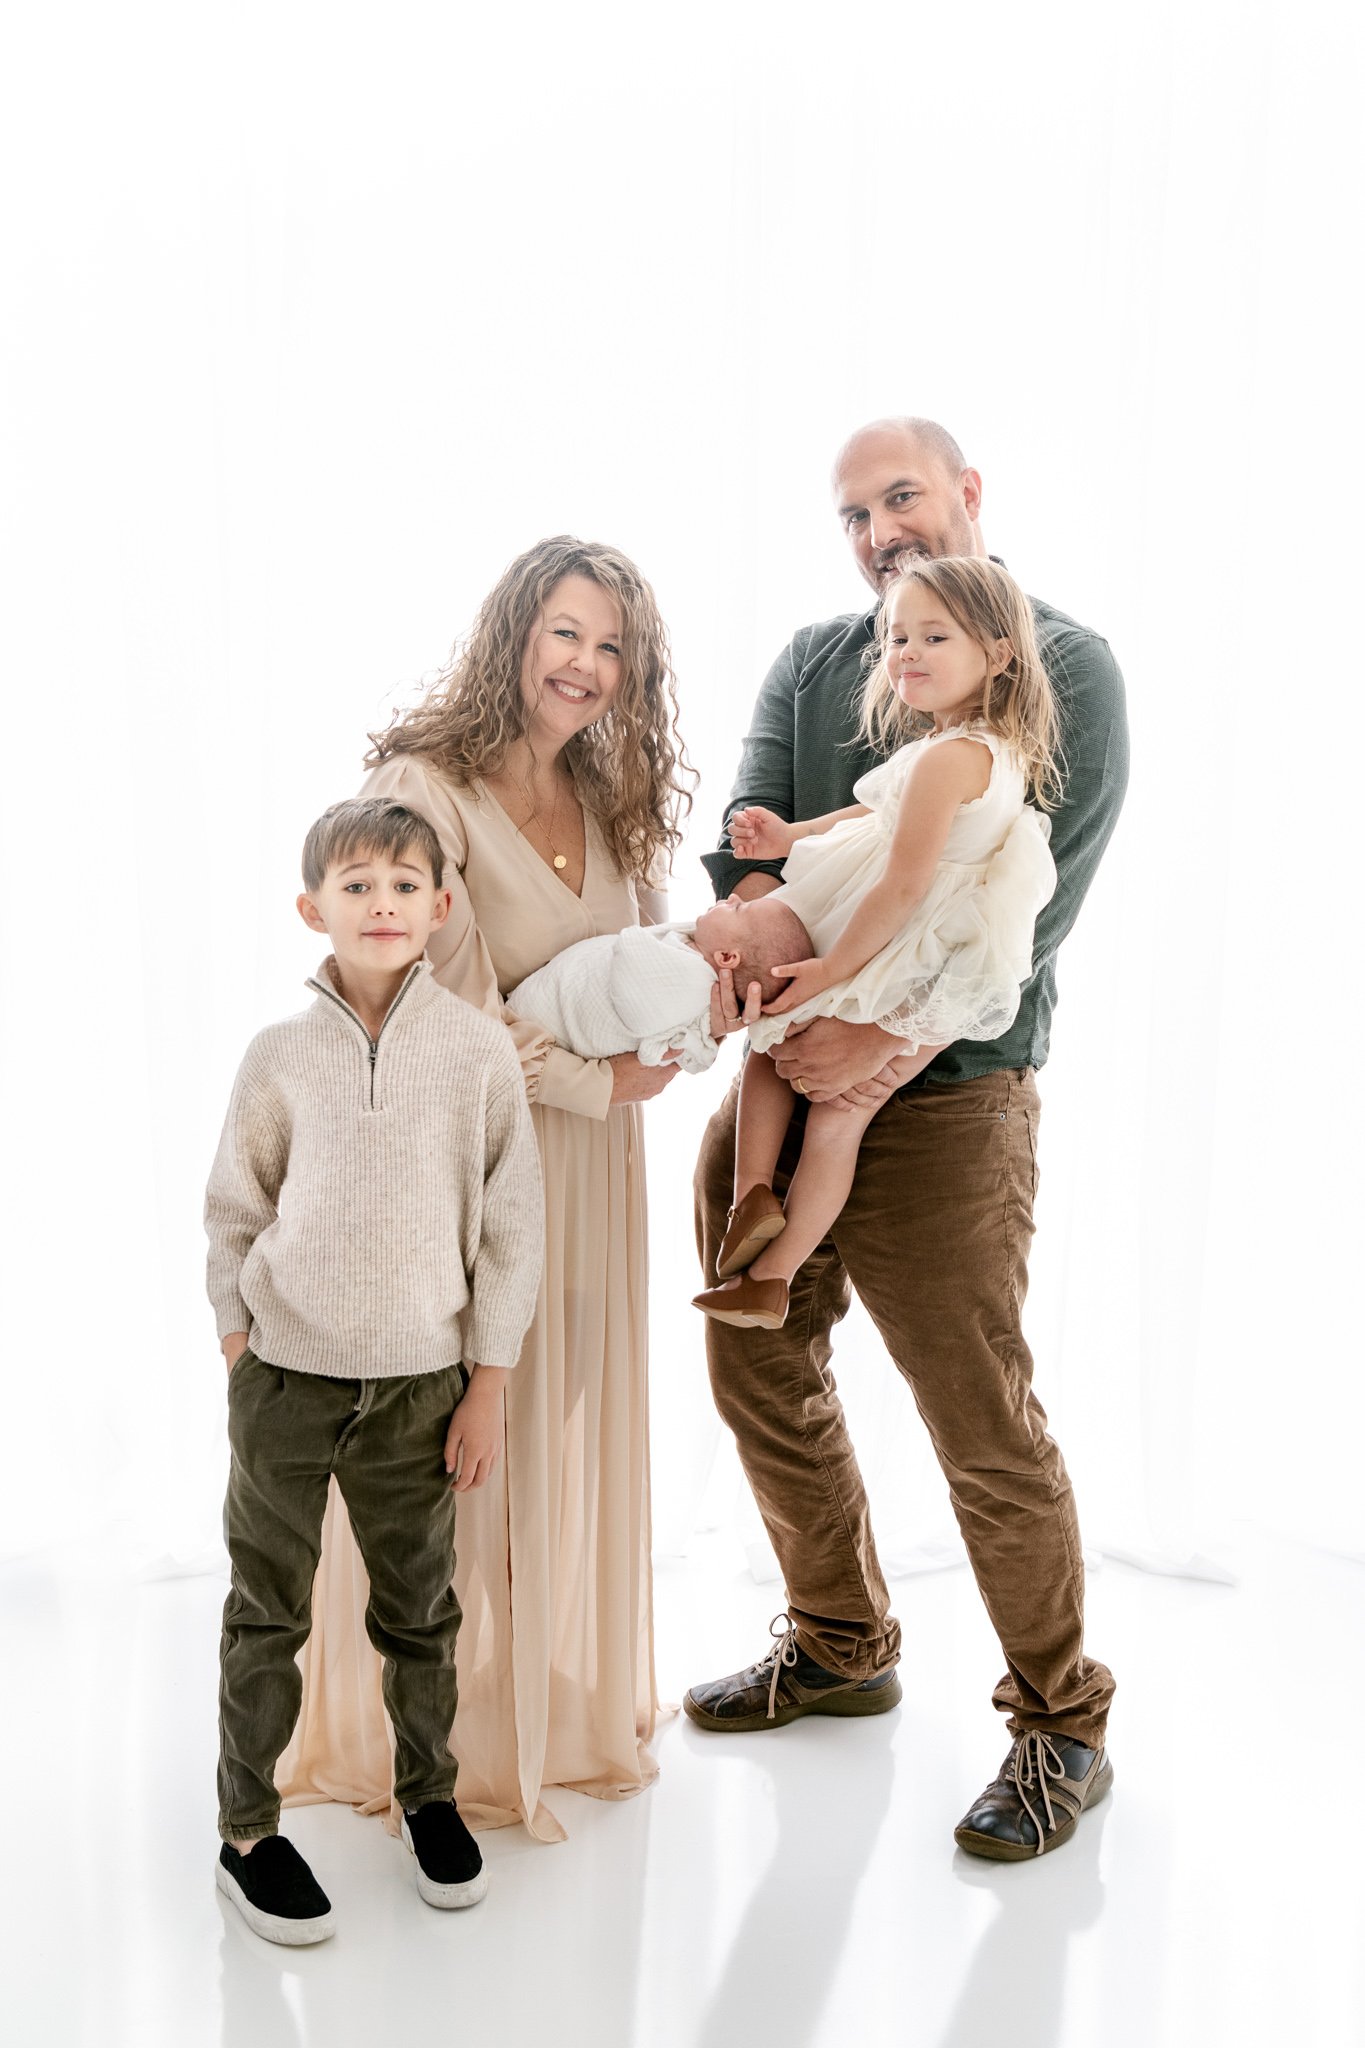  A bright white simple family portrait with a modern vibe by Nicole Hawkins Photography. simple family portrait less is more #NicoleHawkinsPhotography #NicoleHawkinsFamily #Newborns #MaplewoodNJ #studiofamilyportraits #modernfamilyportraits 